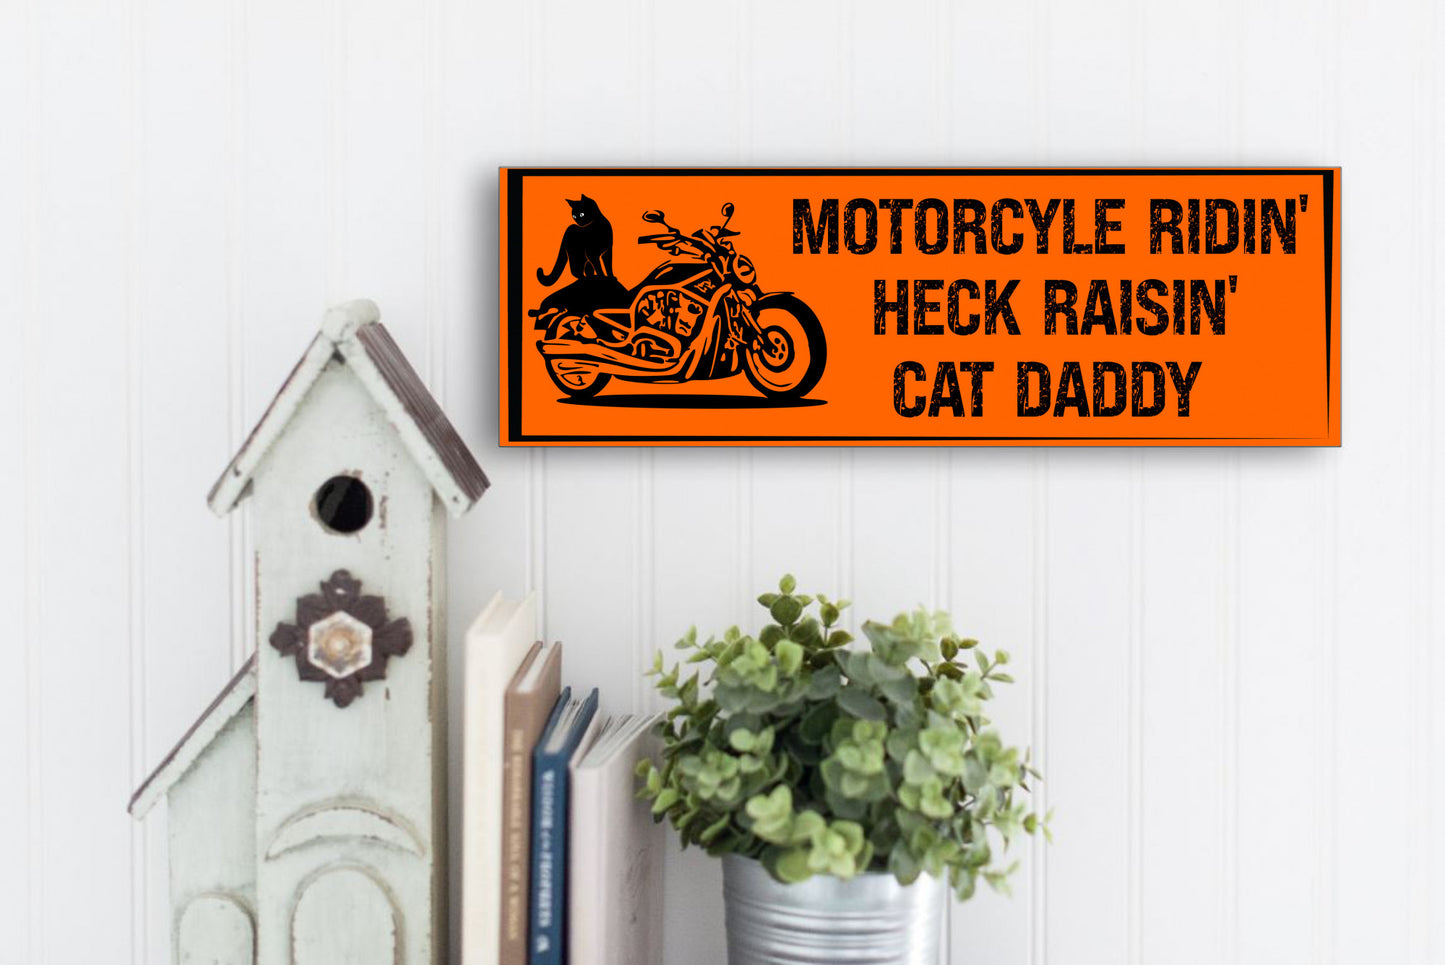 Motorcycle Ridin' Heck Raisin' Cat Daddy Sign